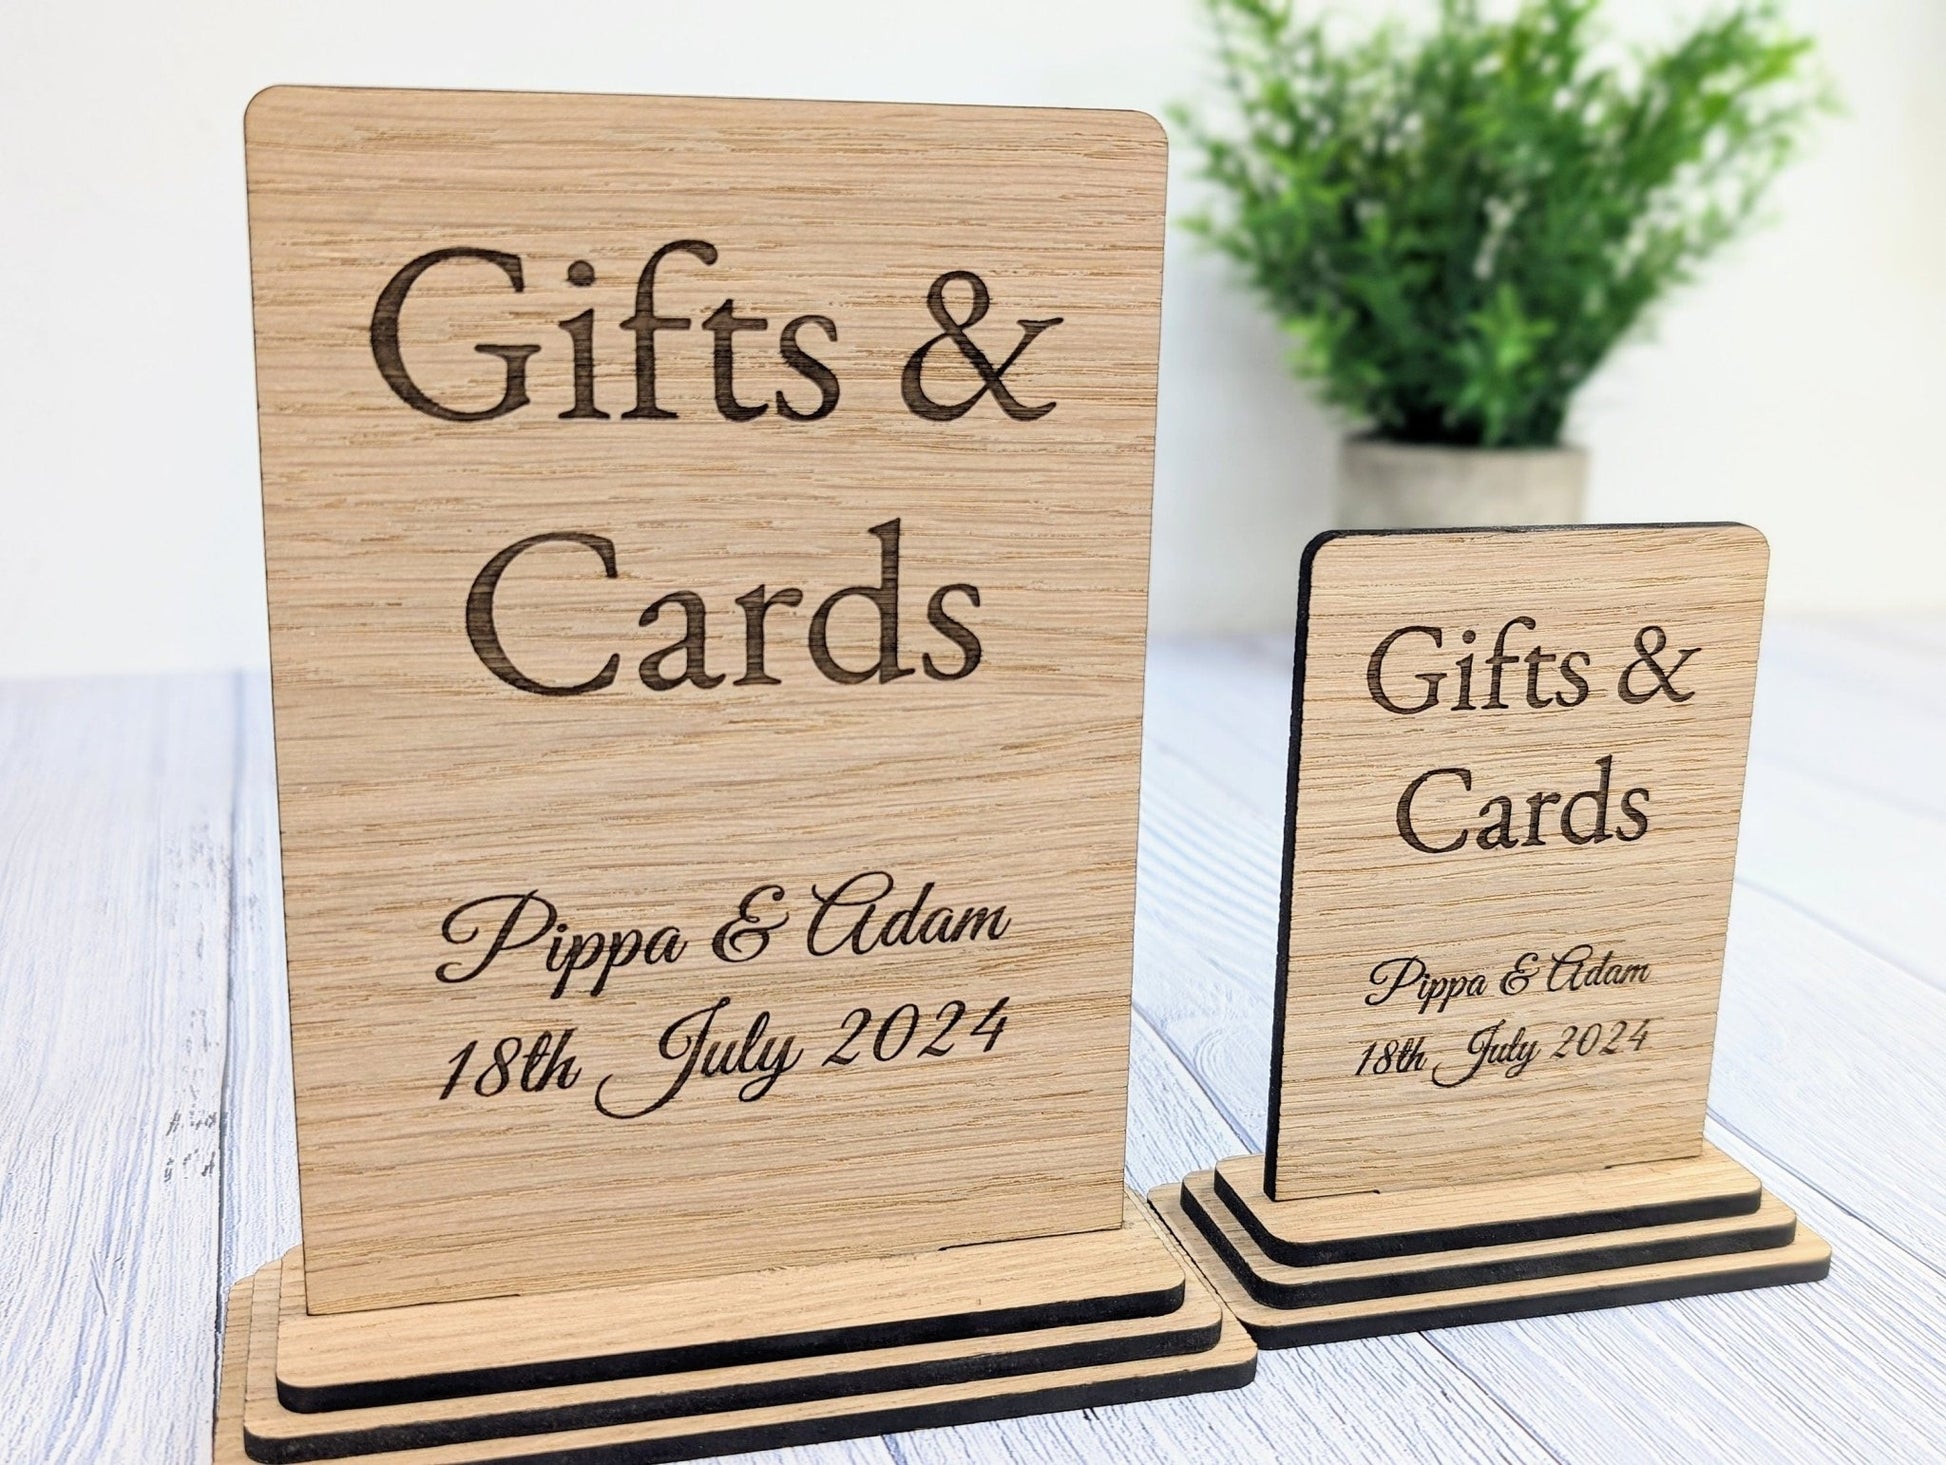 Personalised 'Gifts & Cards' Wooden Sign for Weddings and Parties - Eco-Friendly Freestanding Display with Couple's Name and Date - CherryGroveCraft